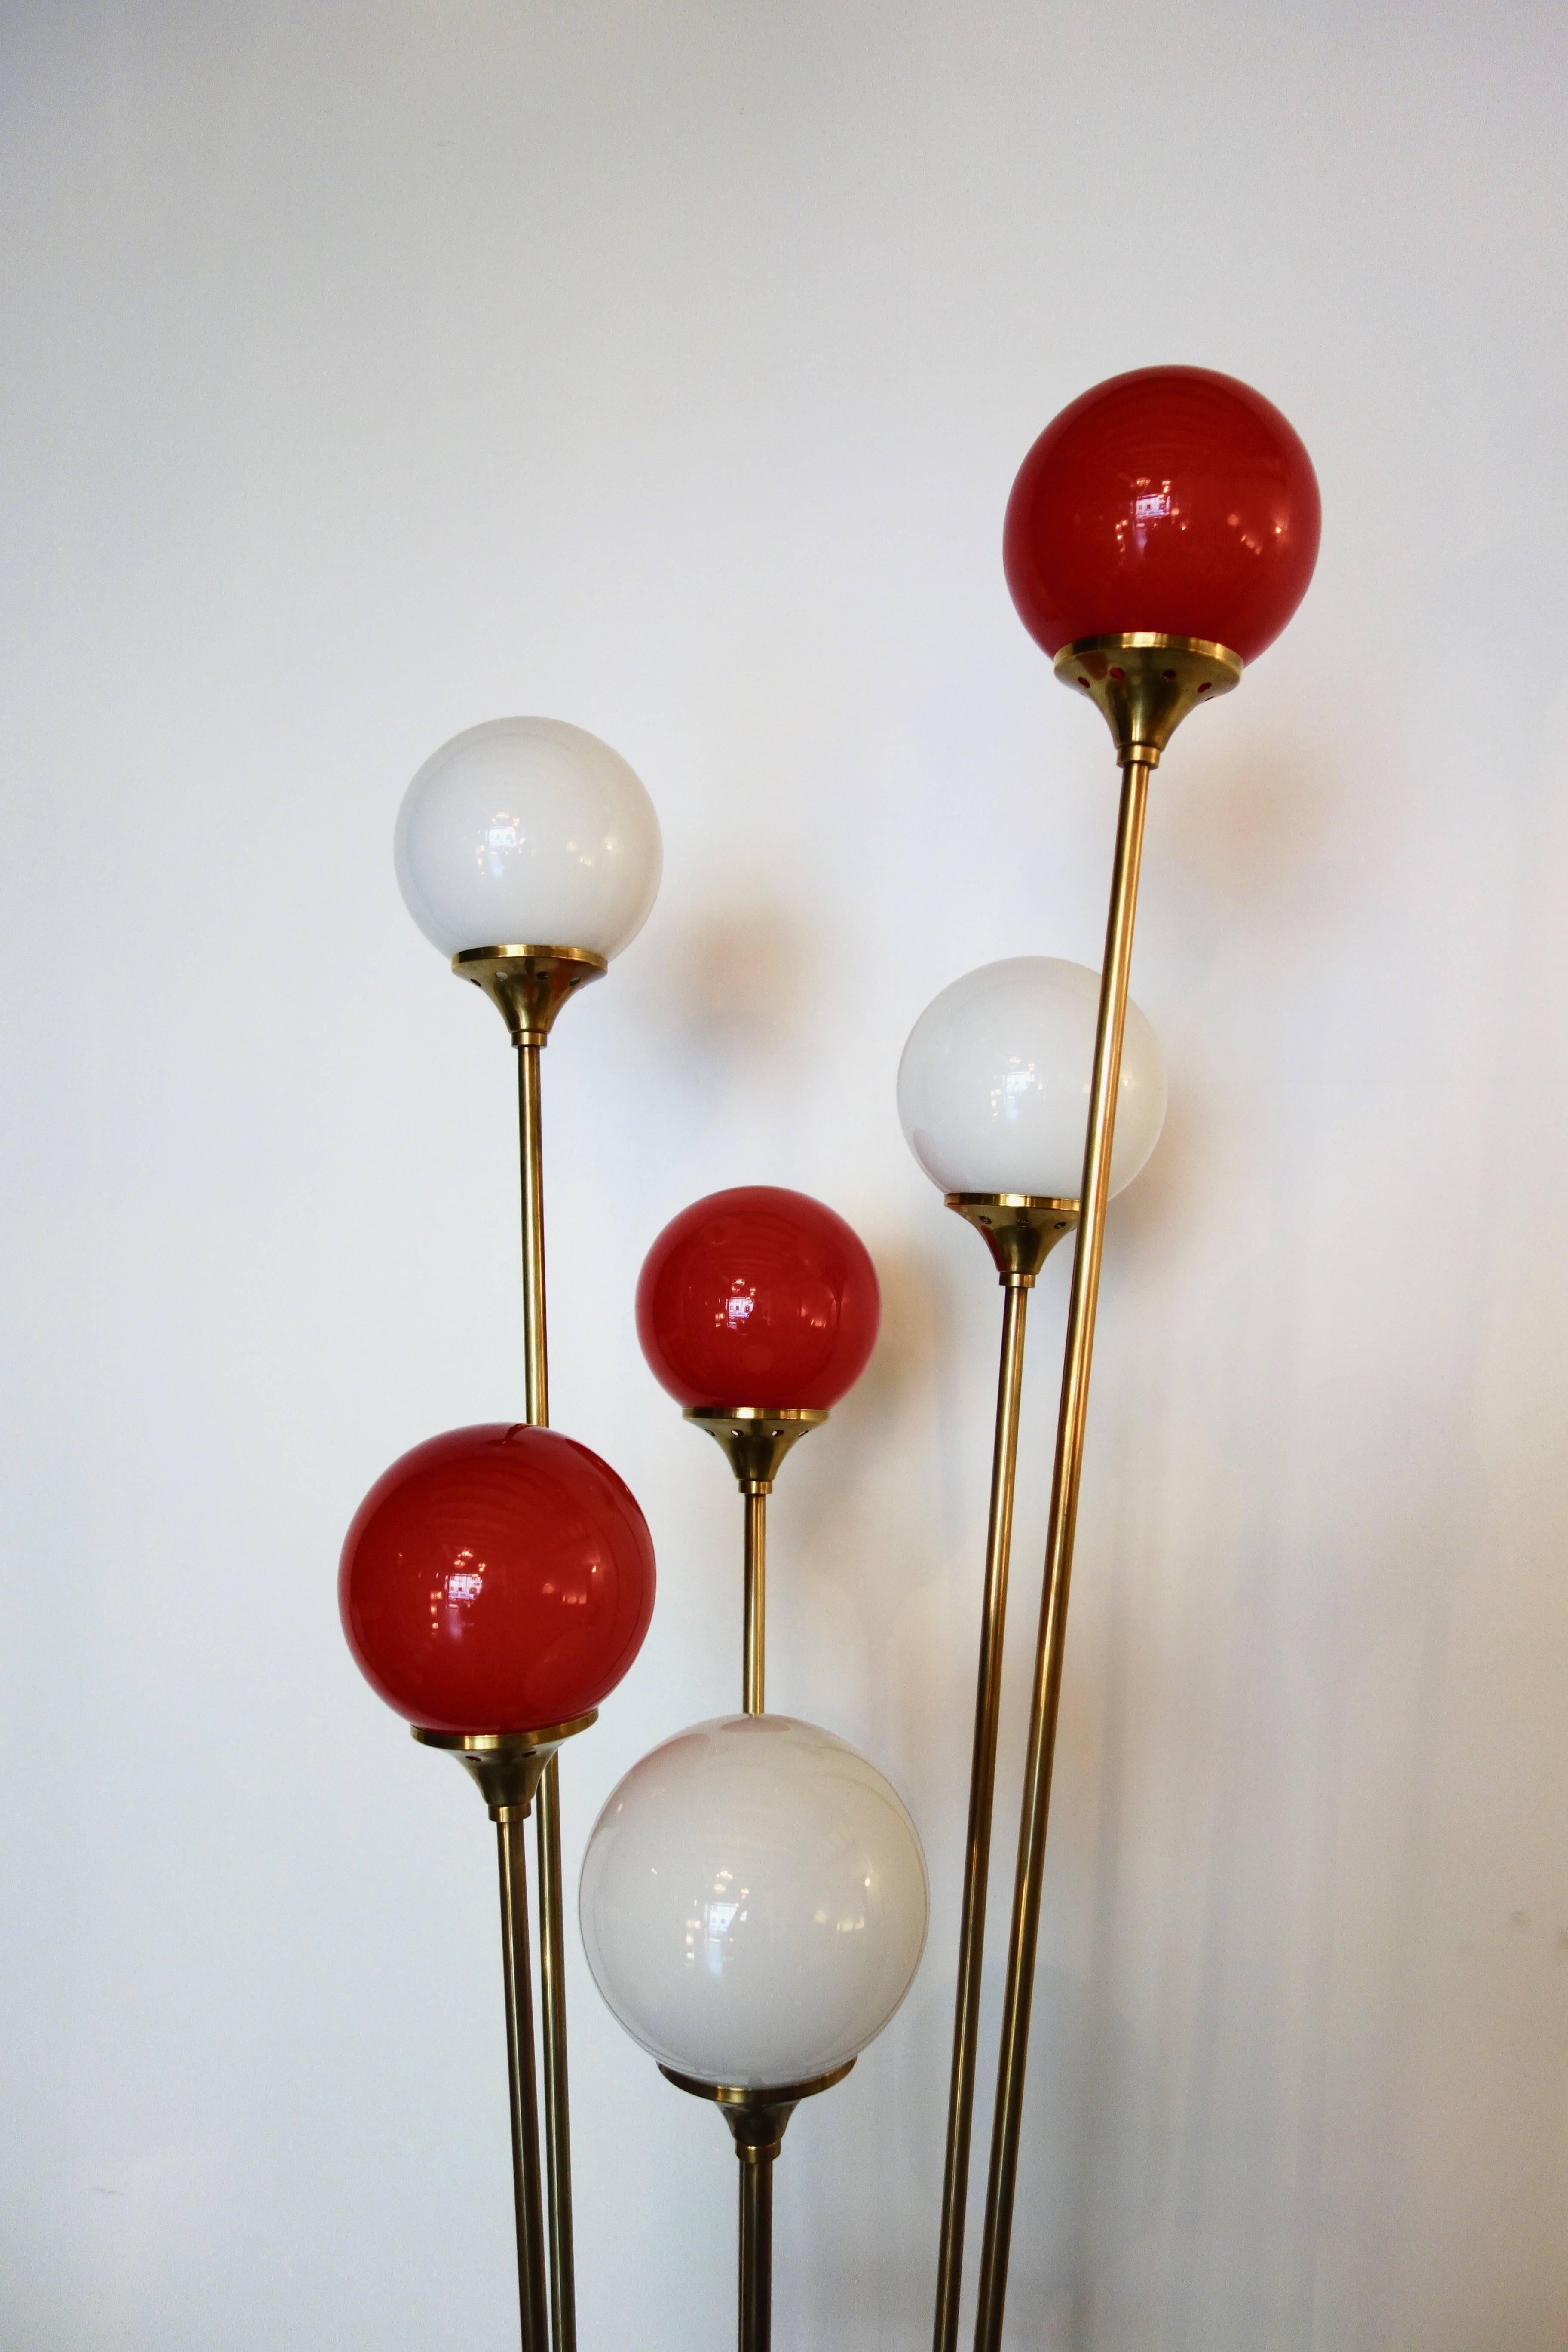 Italian Floor lamp Contemporary in style of Stilnovo. Circular base in gray veined white marble, aged brass and 6 opaline bowls in white and red blown glass. Perfect condition.